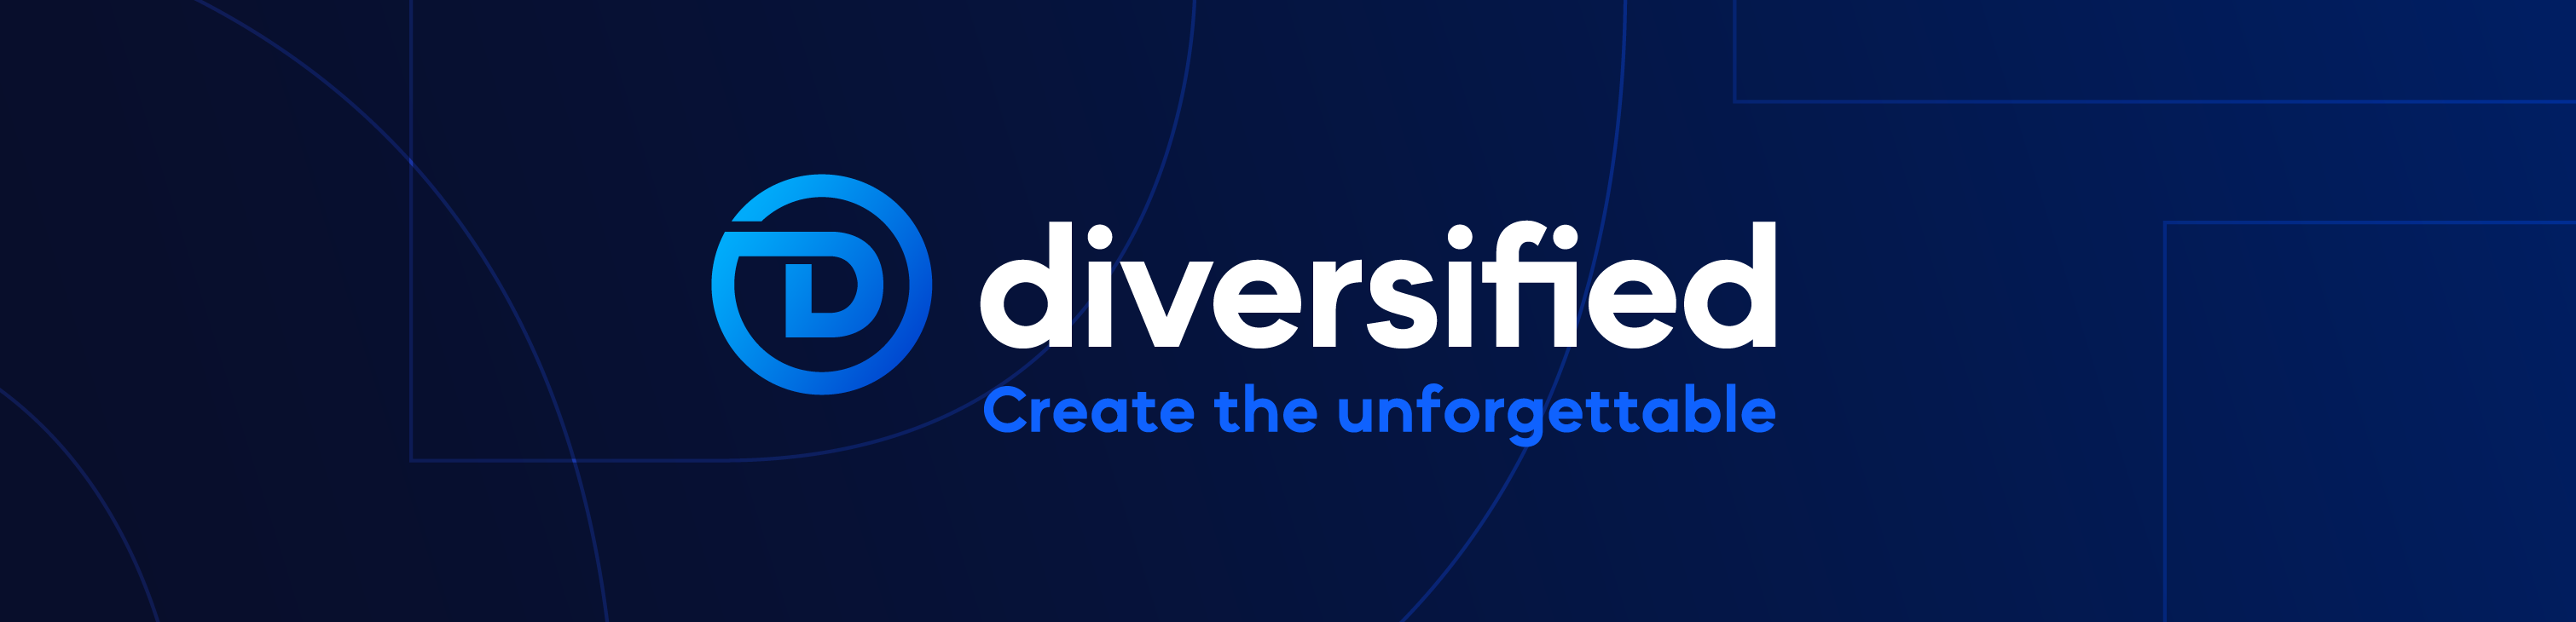 Diversified - Create the Unforgettable